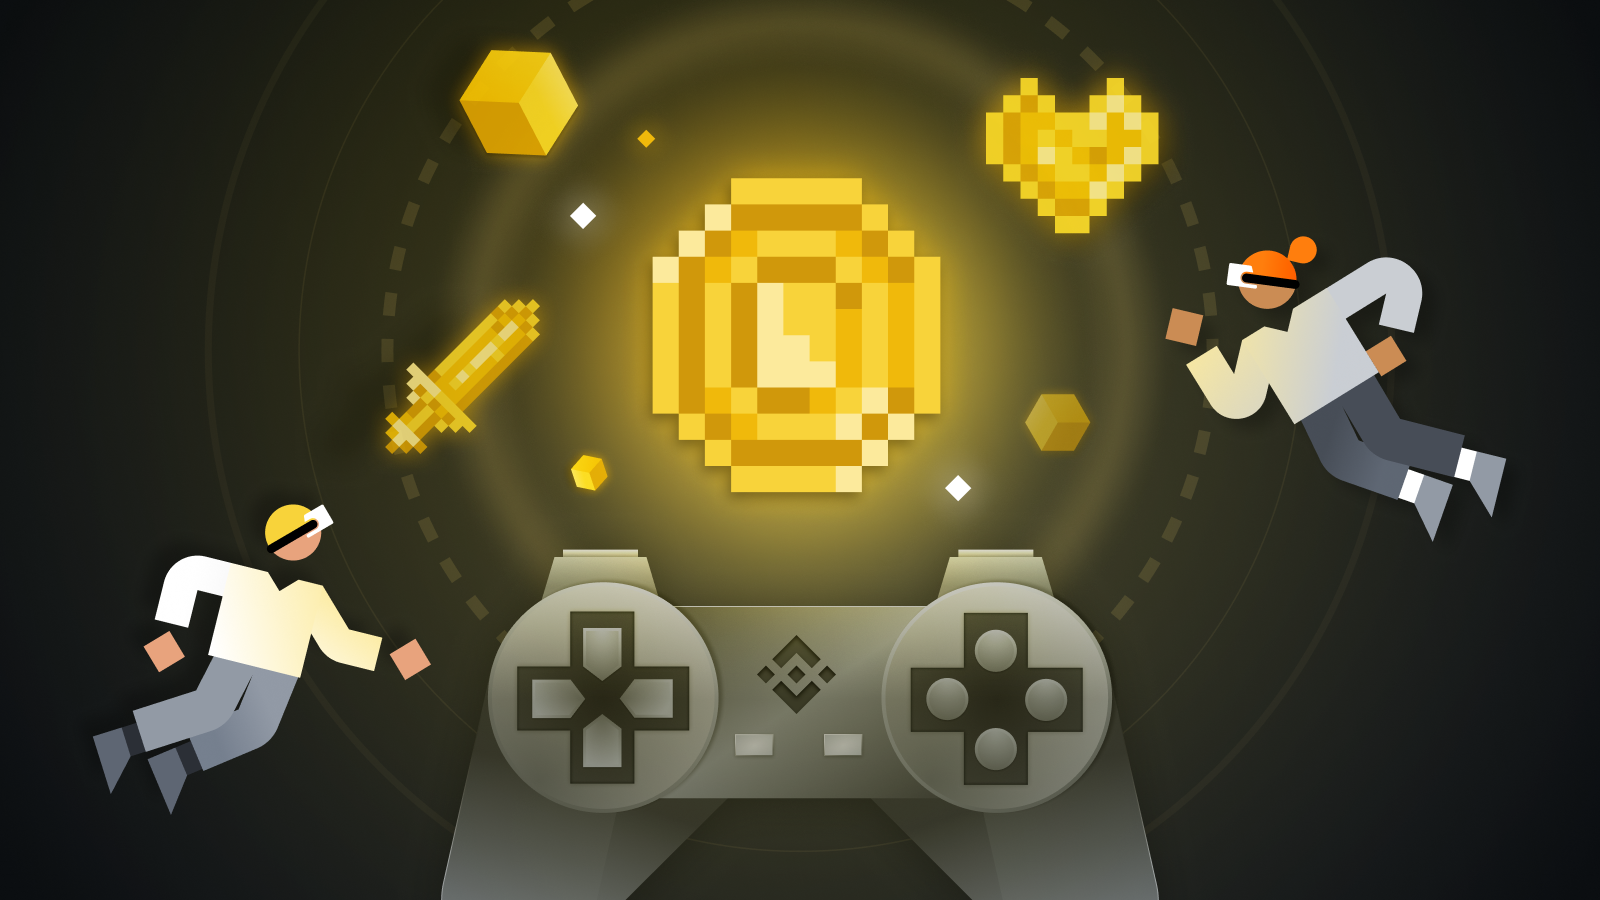 Bitcoin Use In Gaming themed wallpaper